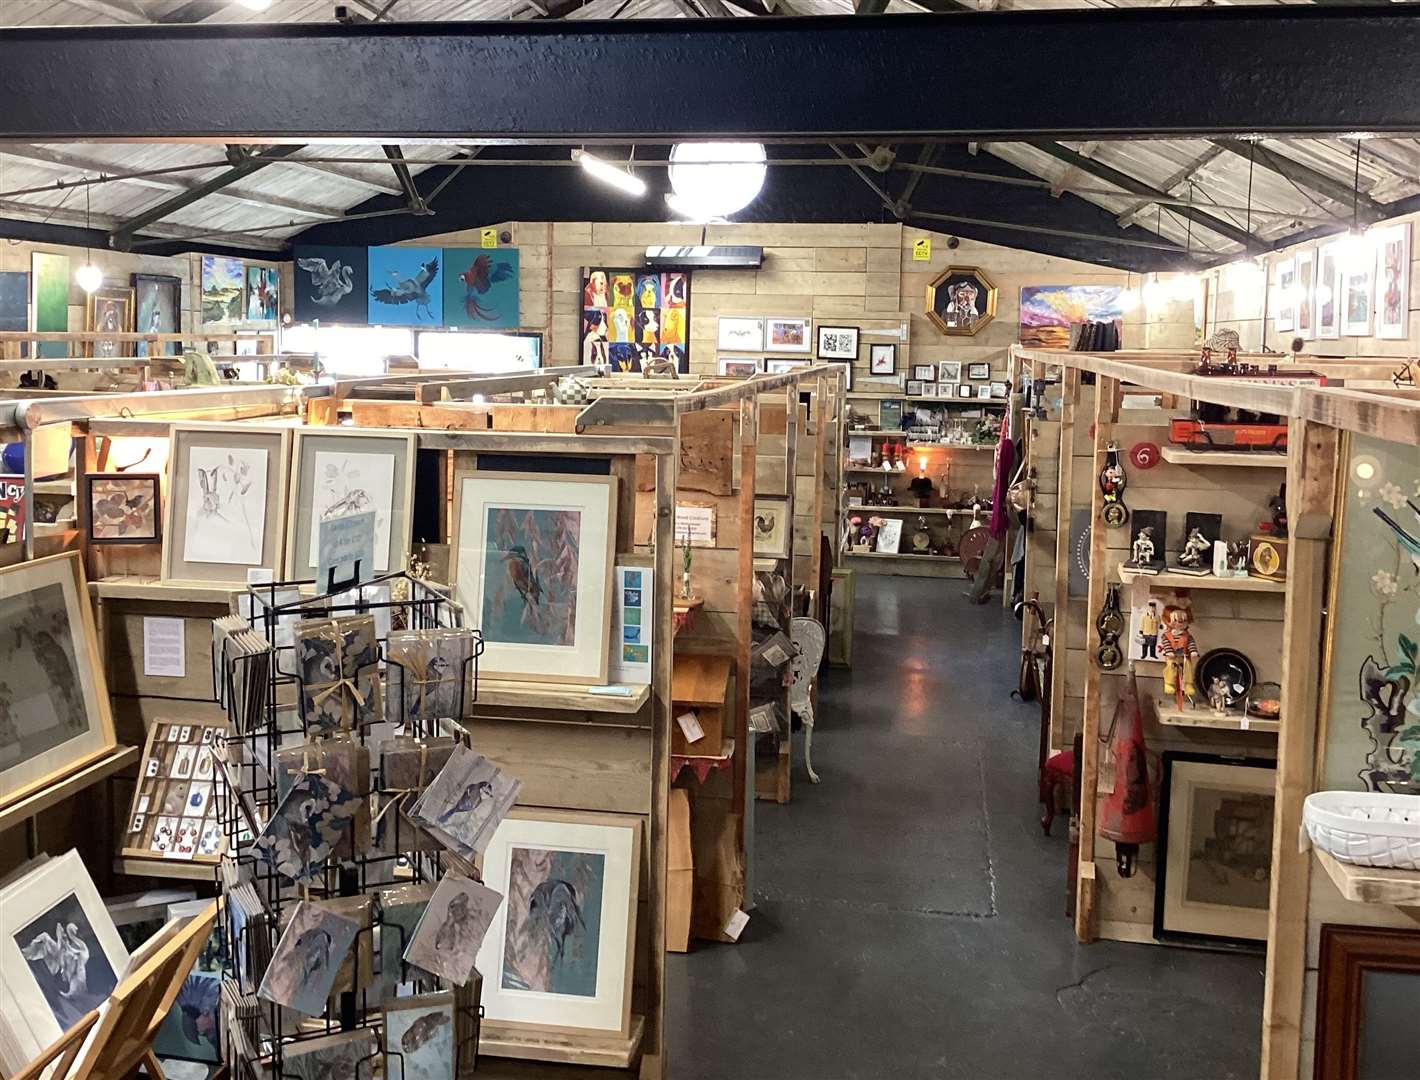 Sid's Emporium is home to 52 stalls selling a variety of goods including antiques